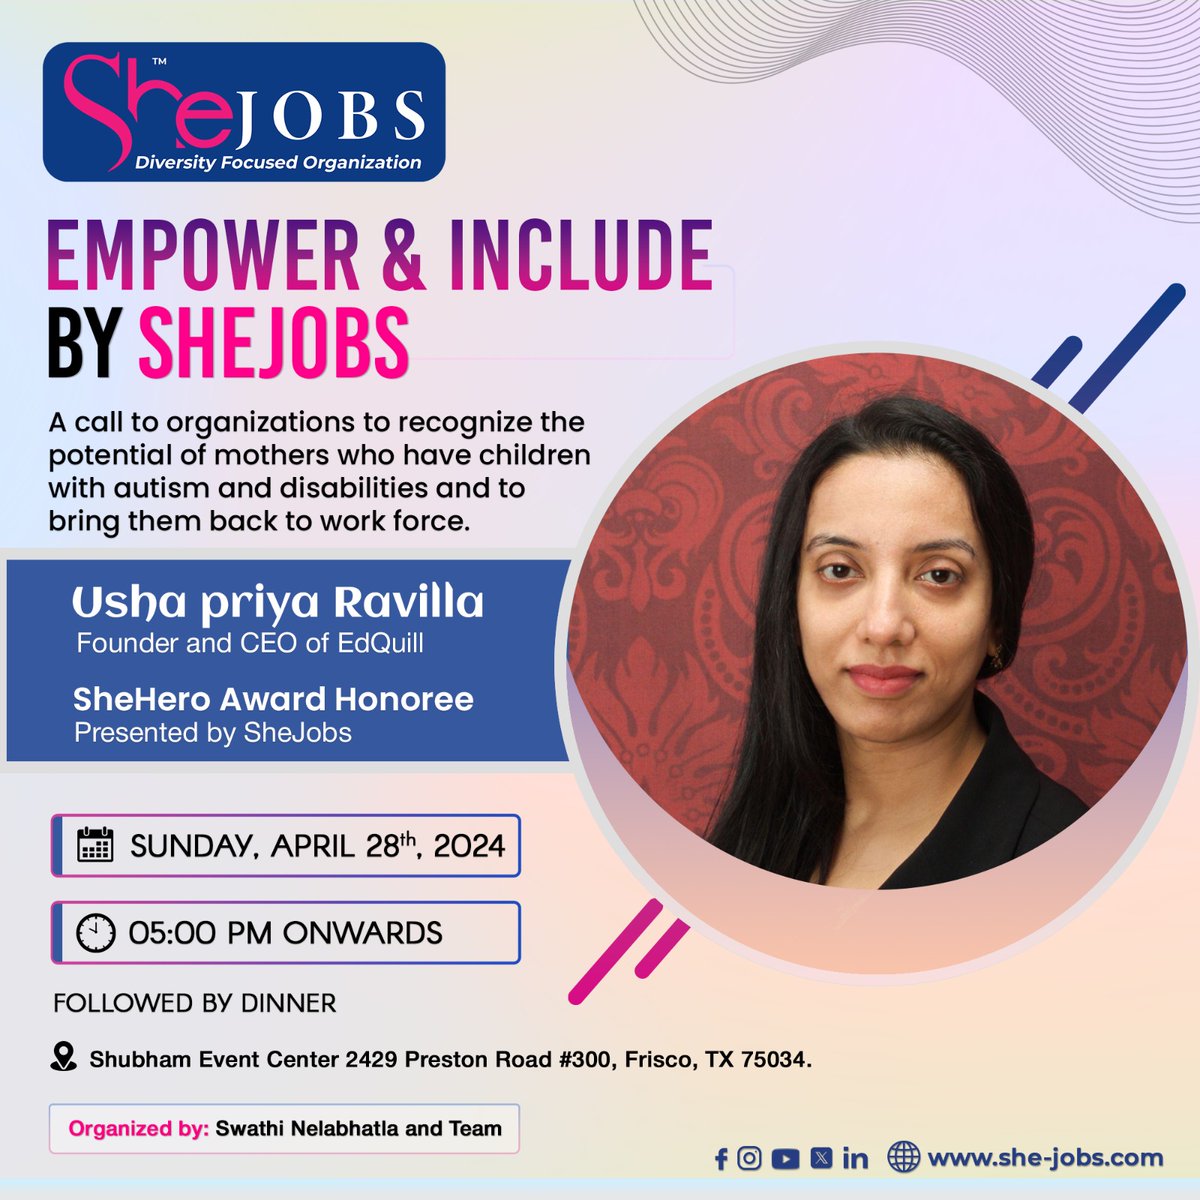 Empowerment begins with recognition ⭐ 

Ushapriya Ravilla, Founder and CEO of Edquill, is being honored with the SheHero Award at our 'Empower and Include' event for her unwavering commitment to revolutionize the learning experience for neurodiversity children.

Having left her…